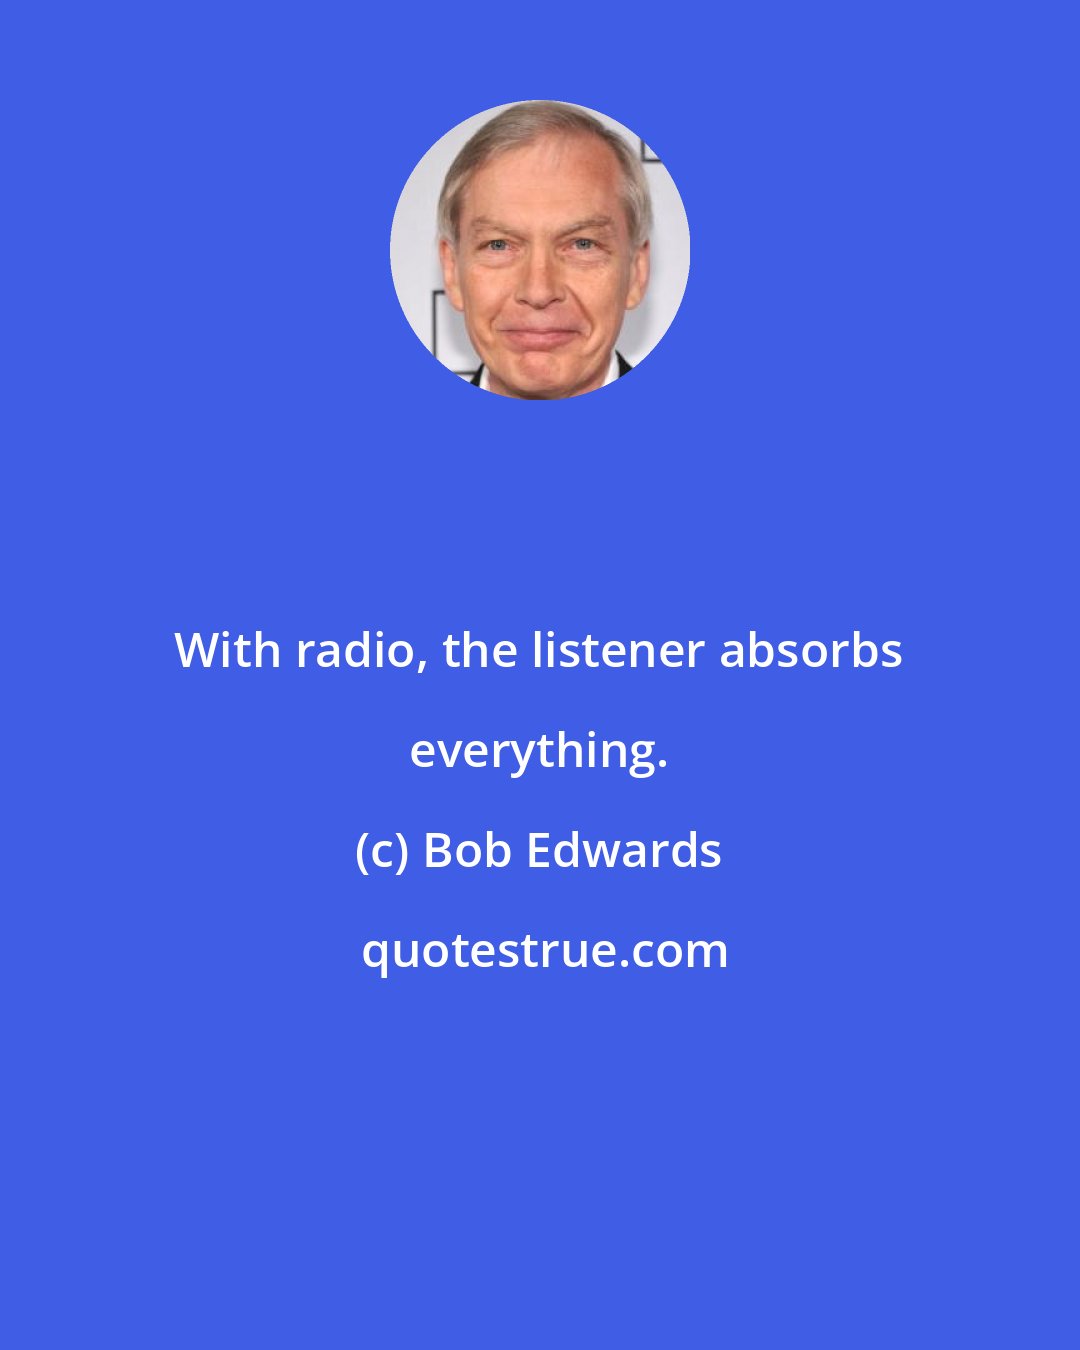 Bob Edwards: With radio, the listener absorbs everything.